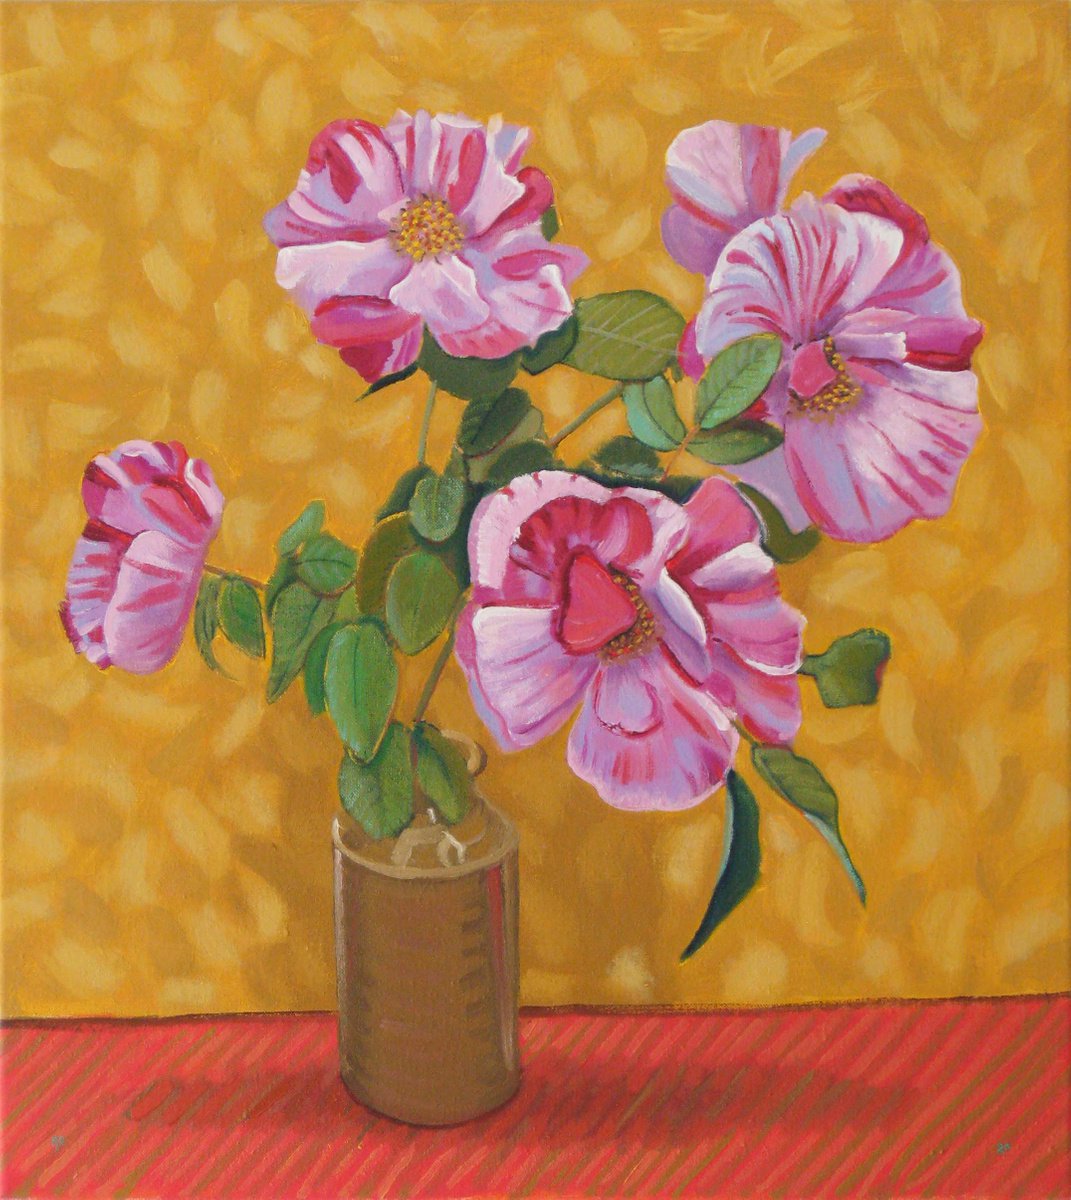 Roses against a Yellow Background by Richard Gibson